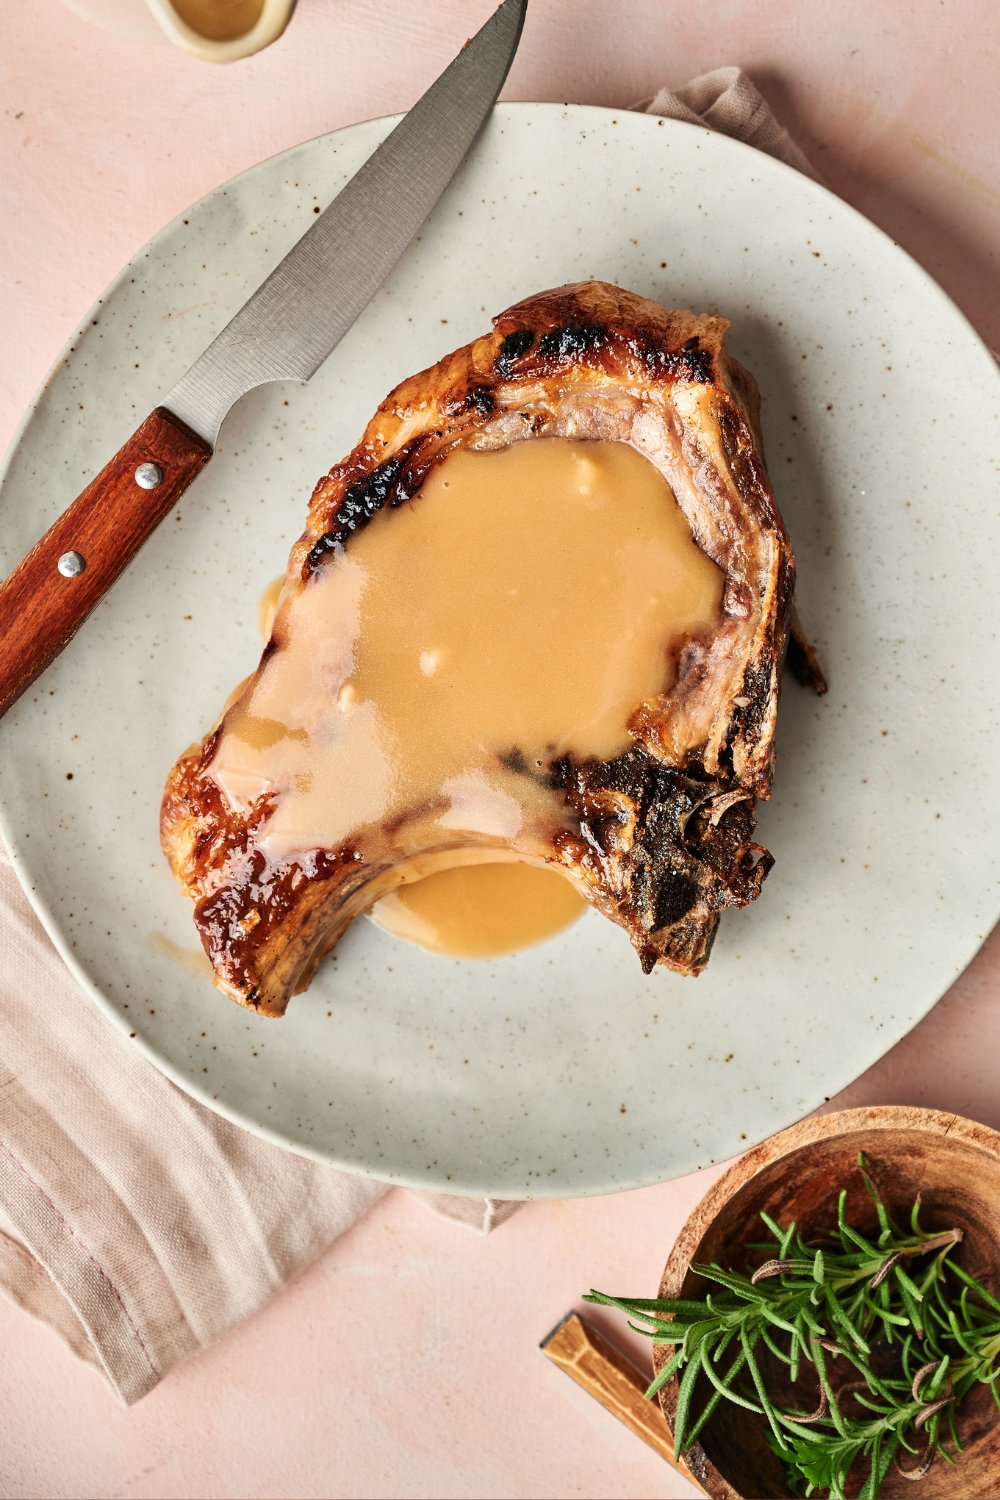 A pork chop sits on a gray plate. The pork chop has been covered in gravy and a knife rests near by.